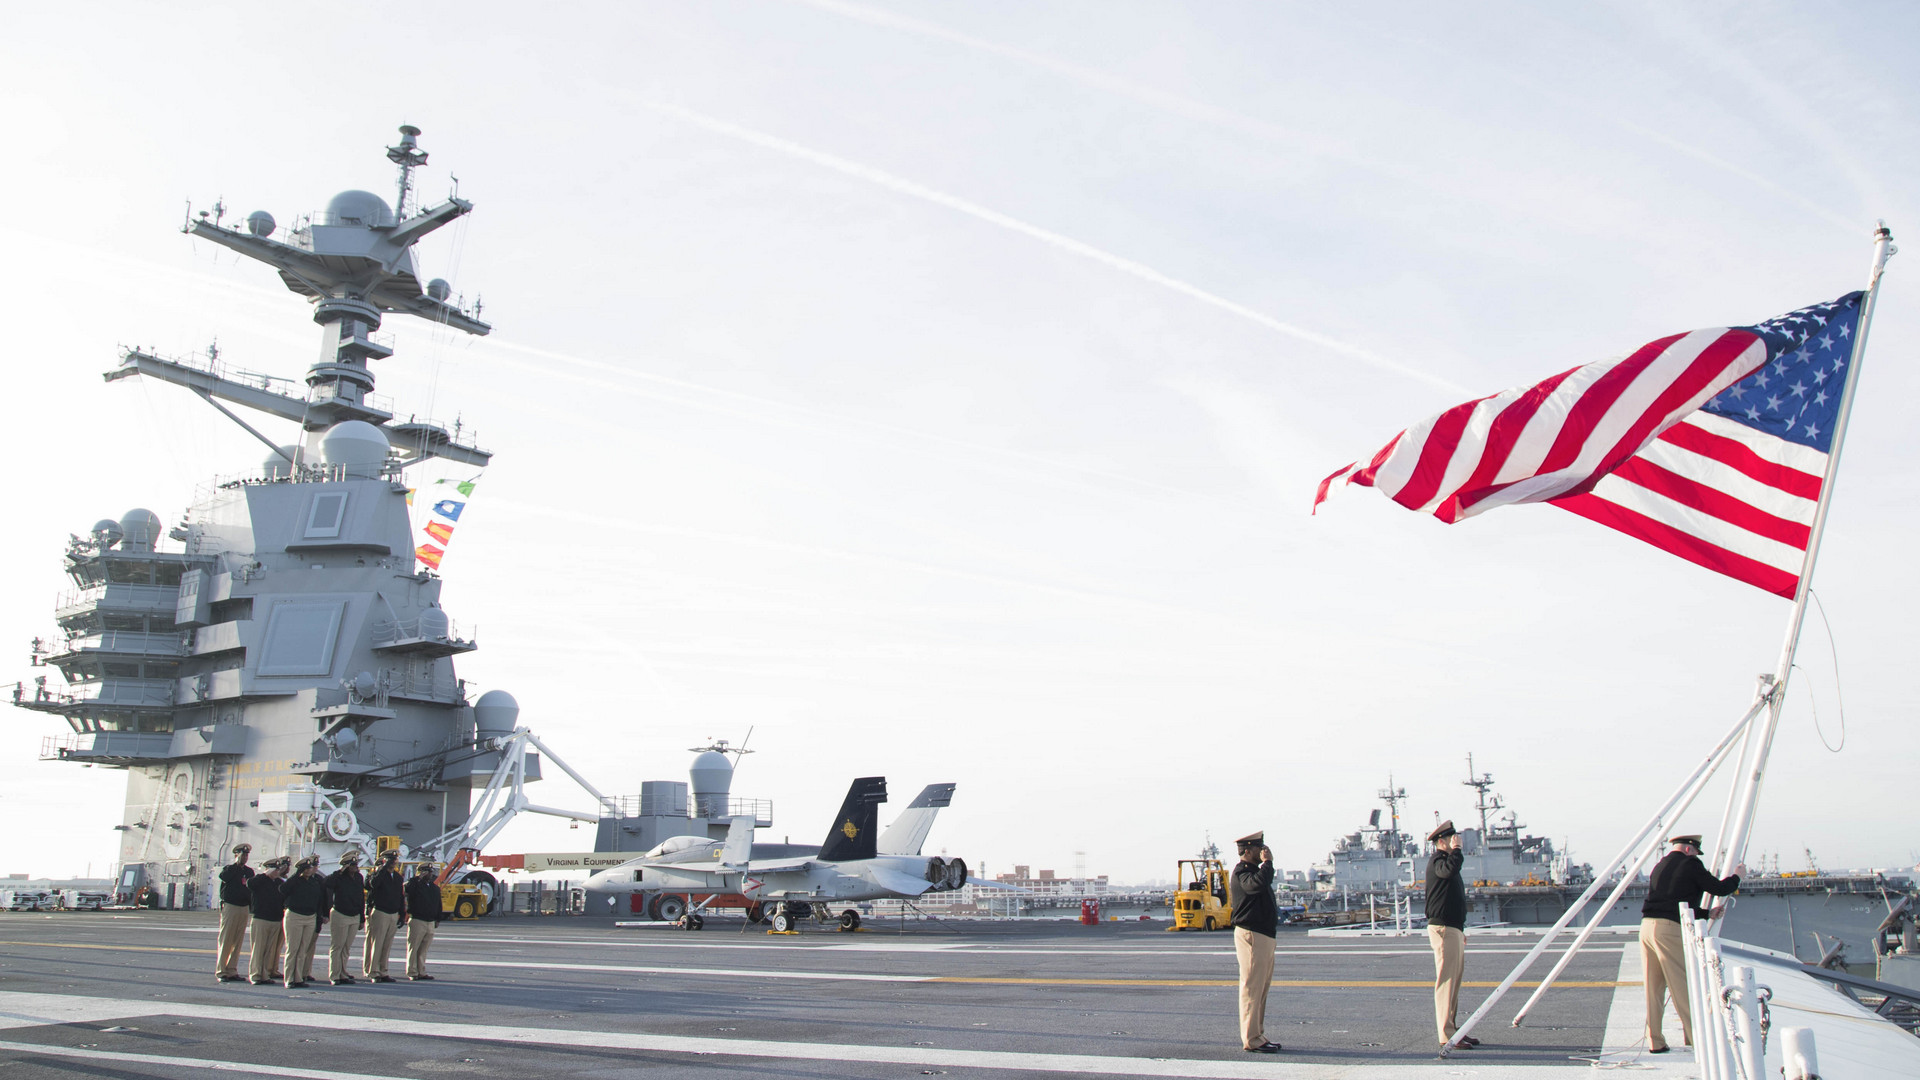 Norfolk (April 1, 2018) Sailors assigned to the aircraft carrier USS Gerald R. Ford's (CVN 78) Chief's Mess conduct colors on the ship's flight deck in commemoration of the 125th anniversary of the chief petty officer rank. (U.S. Navy photo by Mass Communication Specialist 3rd Class Cat Campbell. -